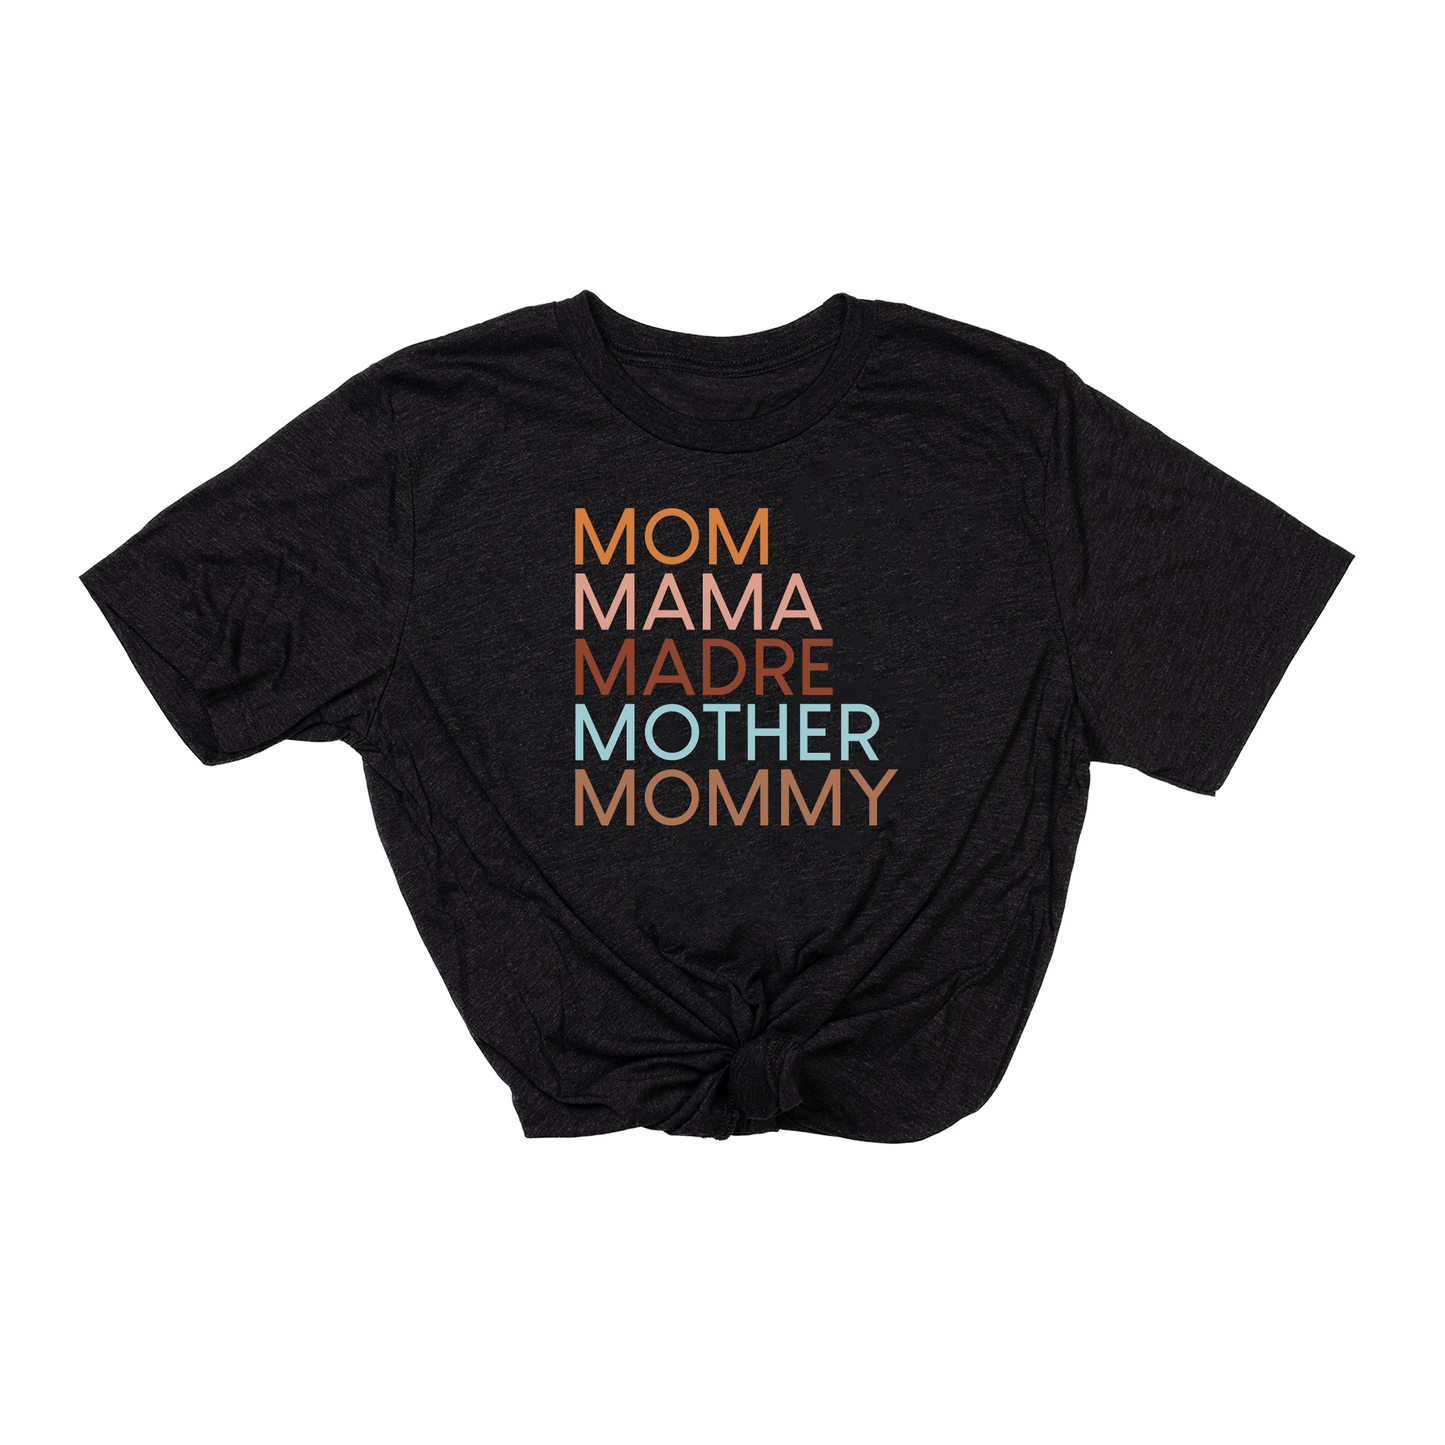 Mom Mama Madre Mother Mommy (Across Front) - Tee (Charcoal Black)